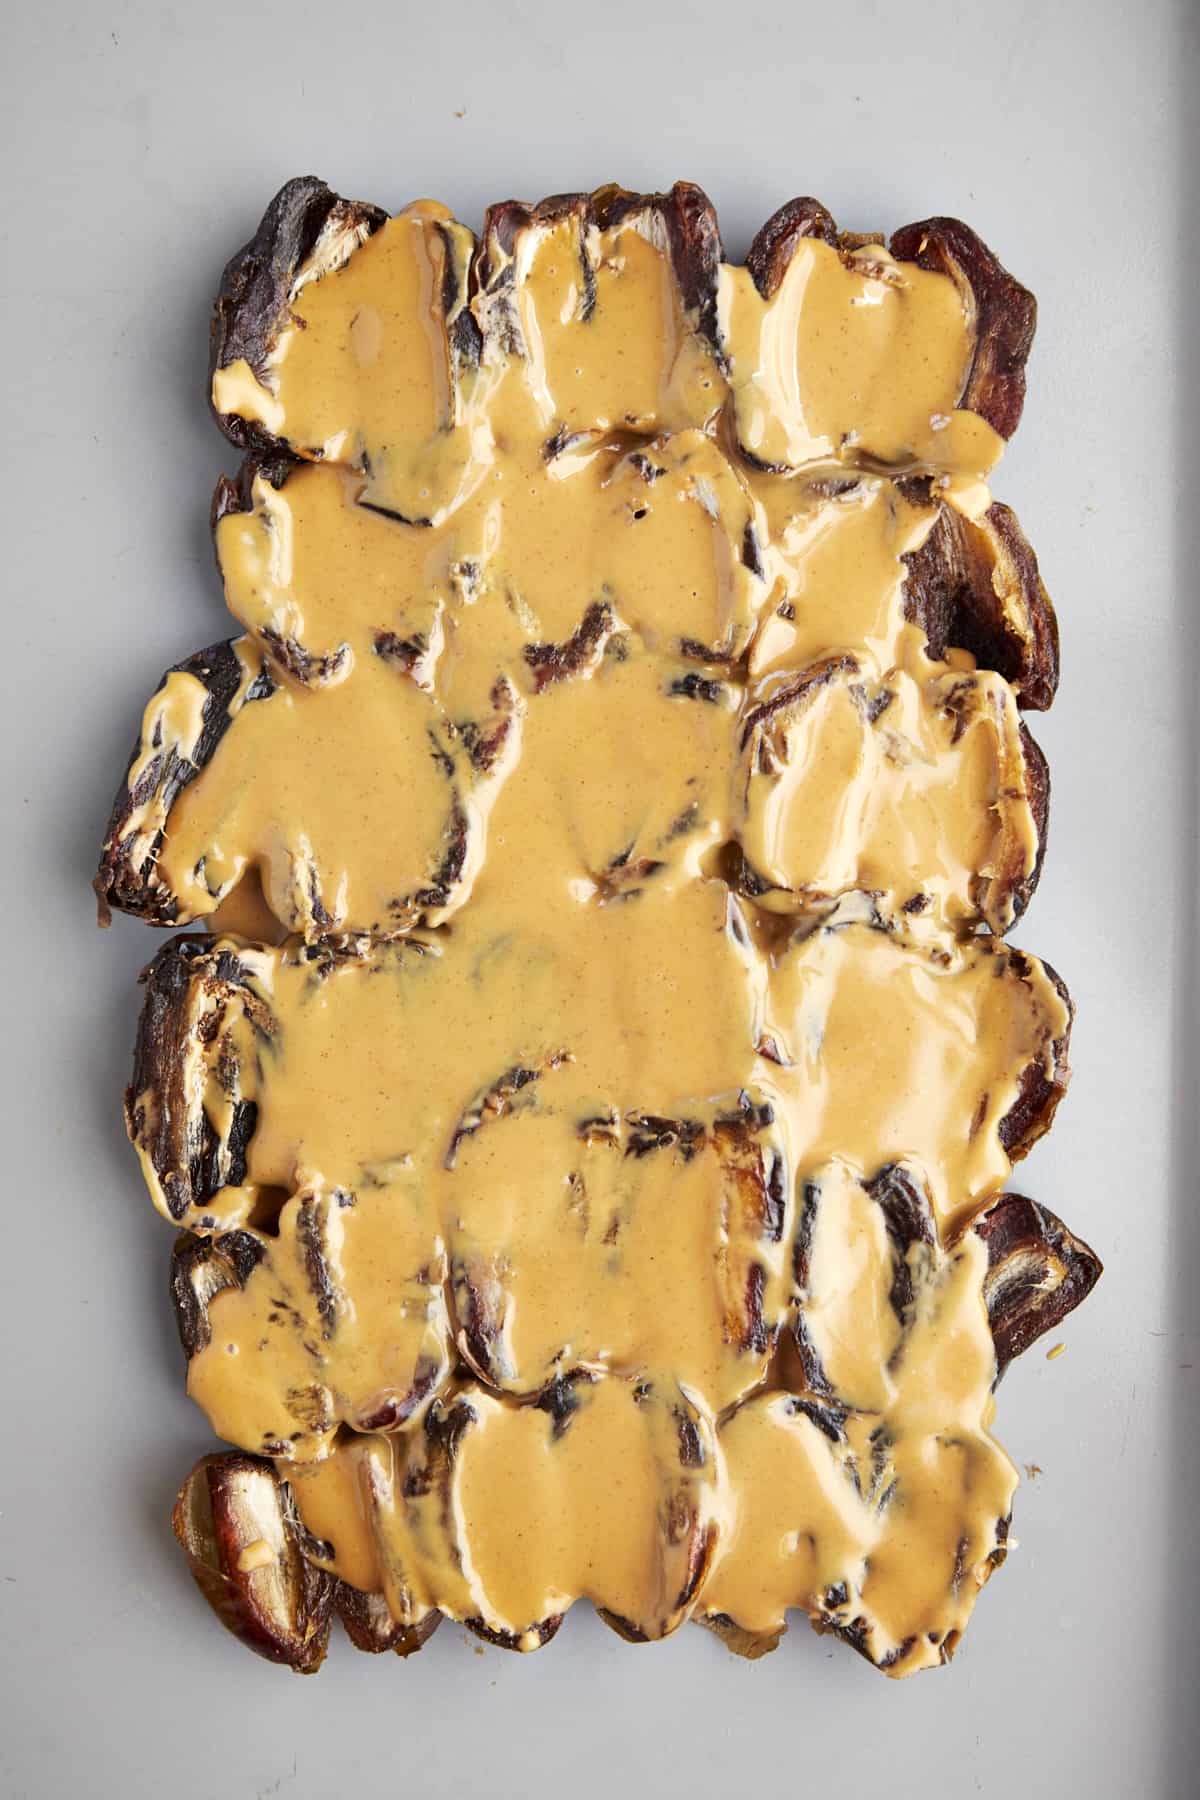 A layer of split dates topped with peanut butter.